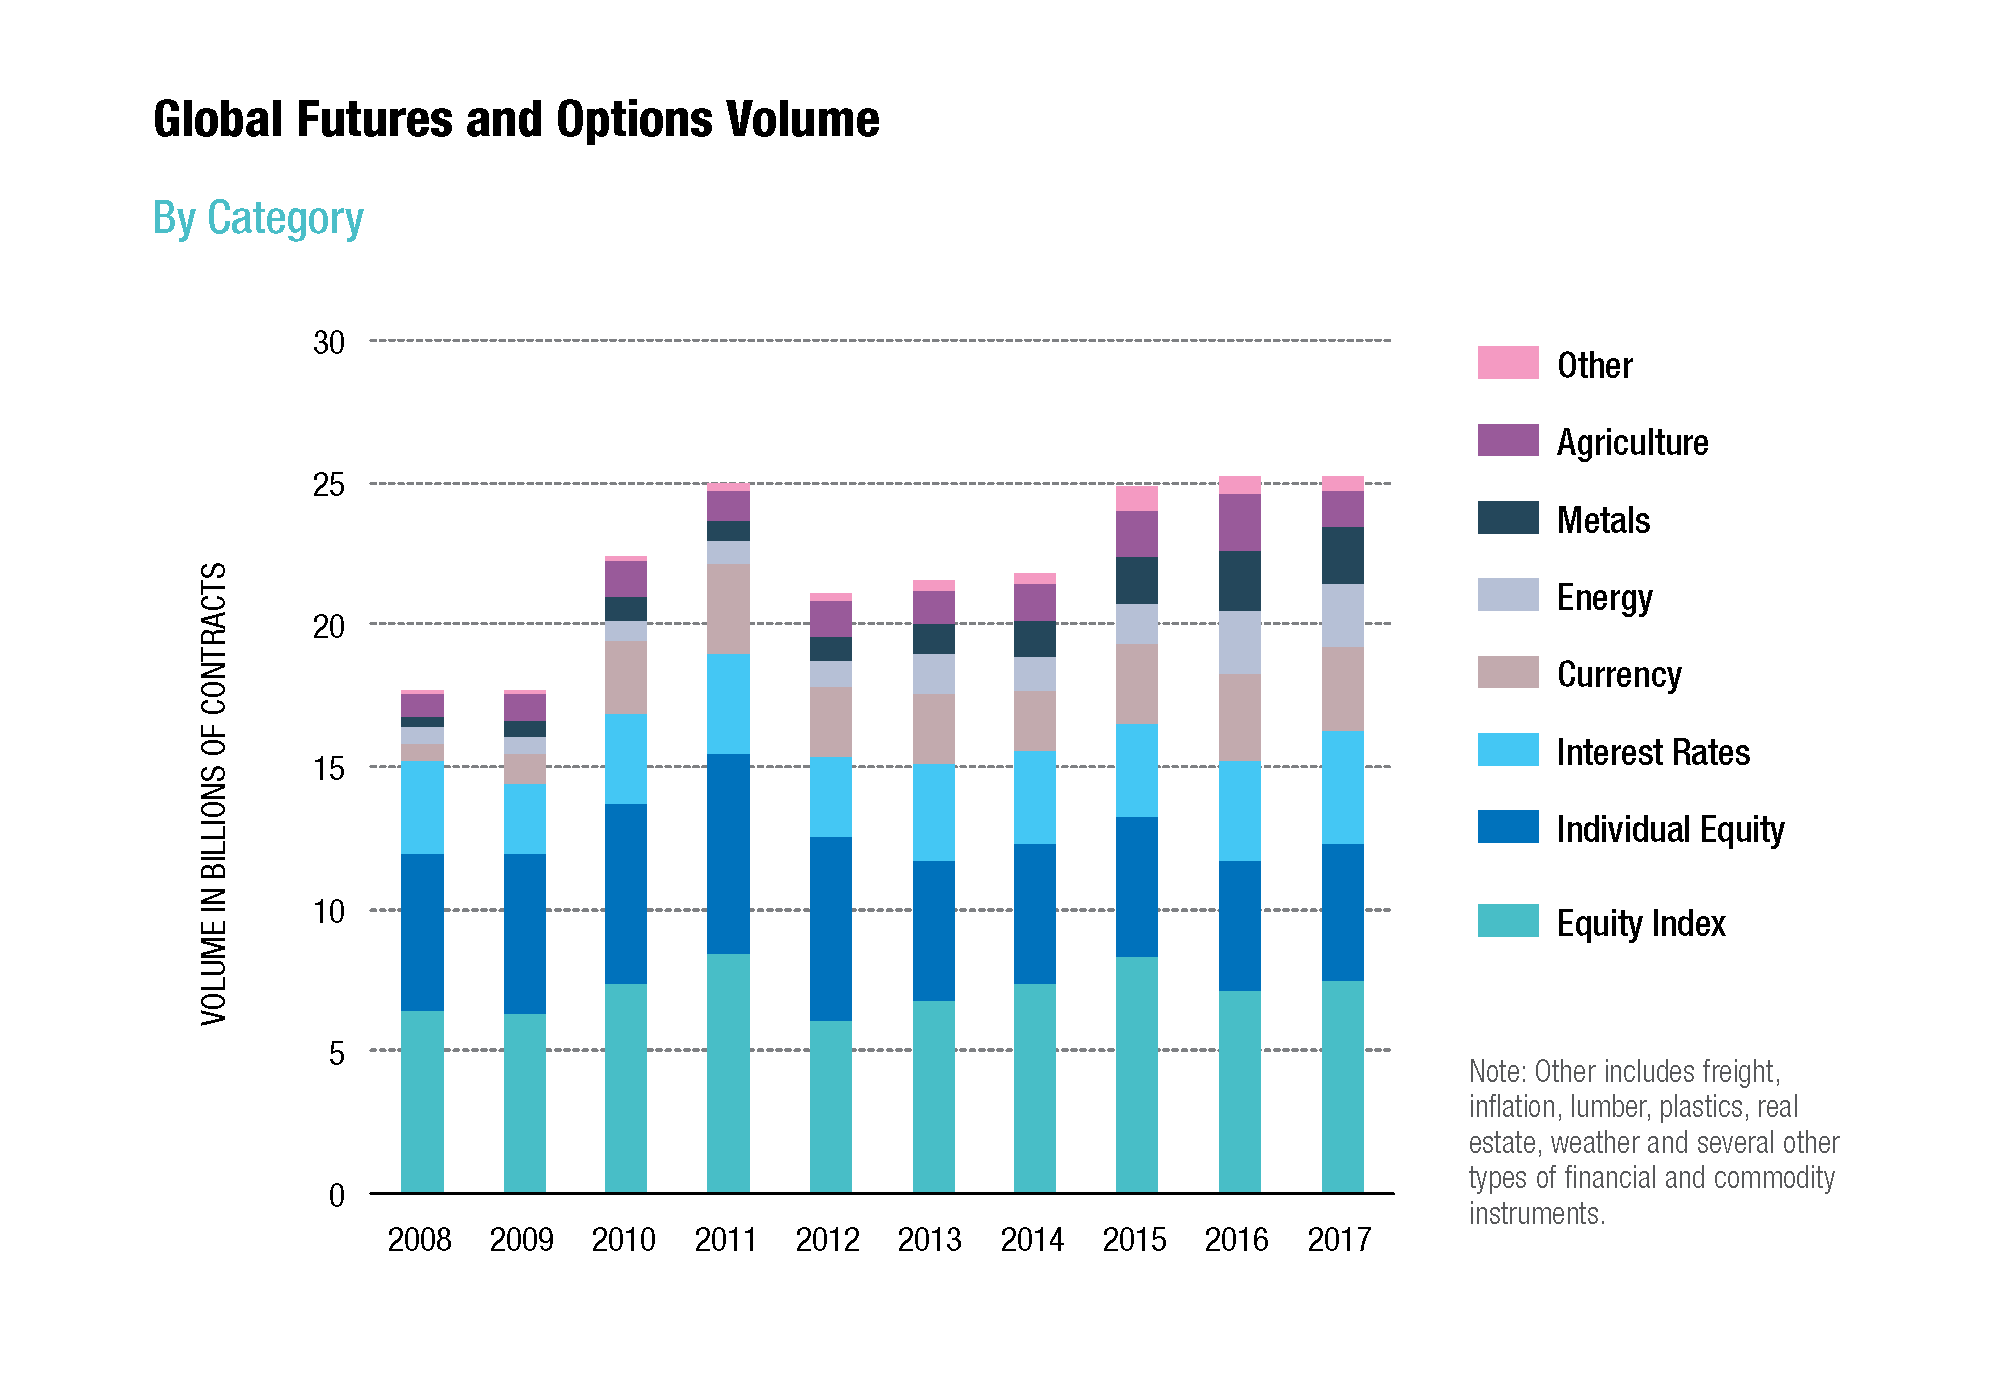 Global Futures and Options Volume by Category